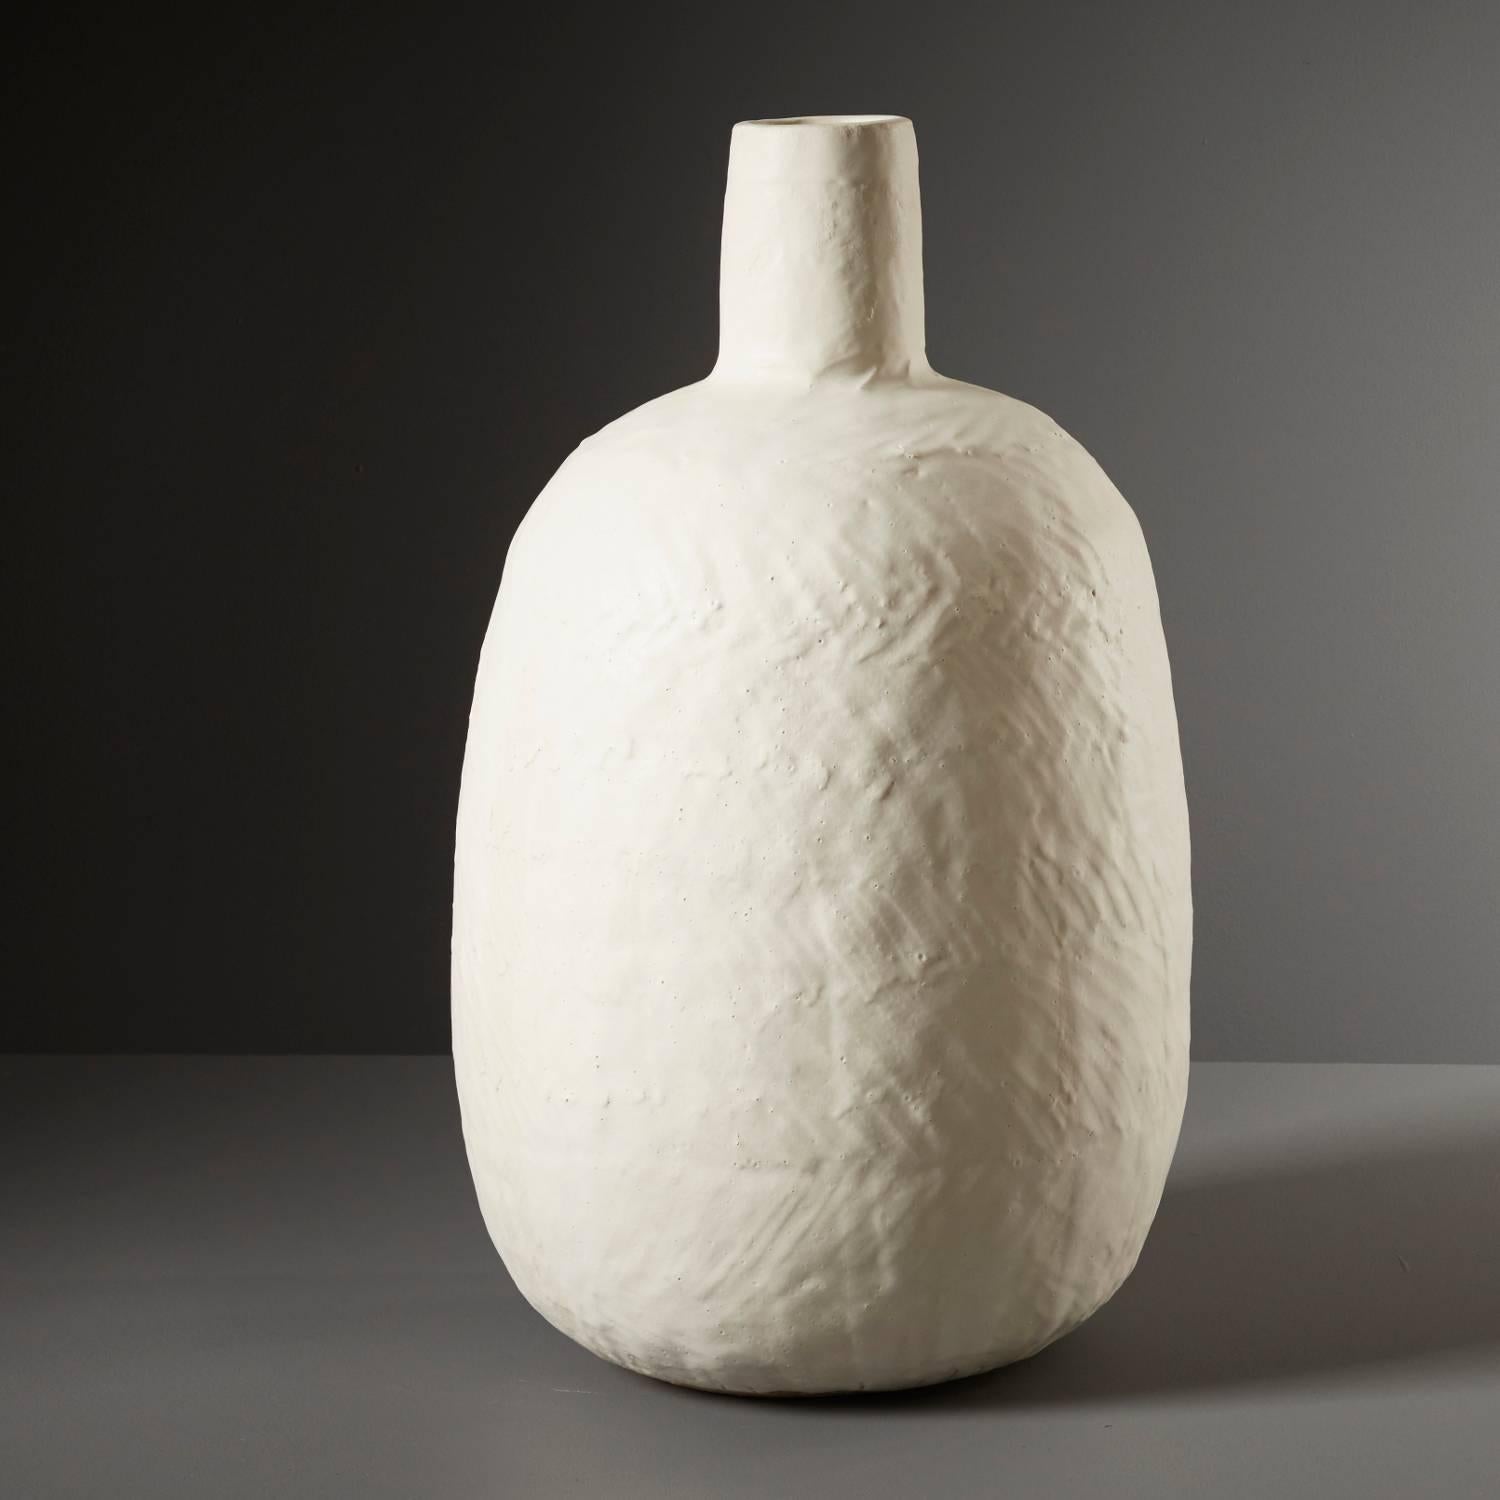 Daniel Reynold’s ‘Large White Bottle’ is a striking decorative vessel crafted to complement any interior. Hand built in stoneware clay, this modern piece is an assembly of depth and texture achieved by applying dolomite glaze: a calcium magnesium